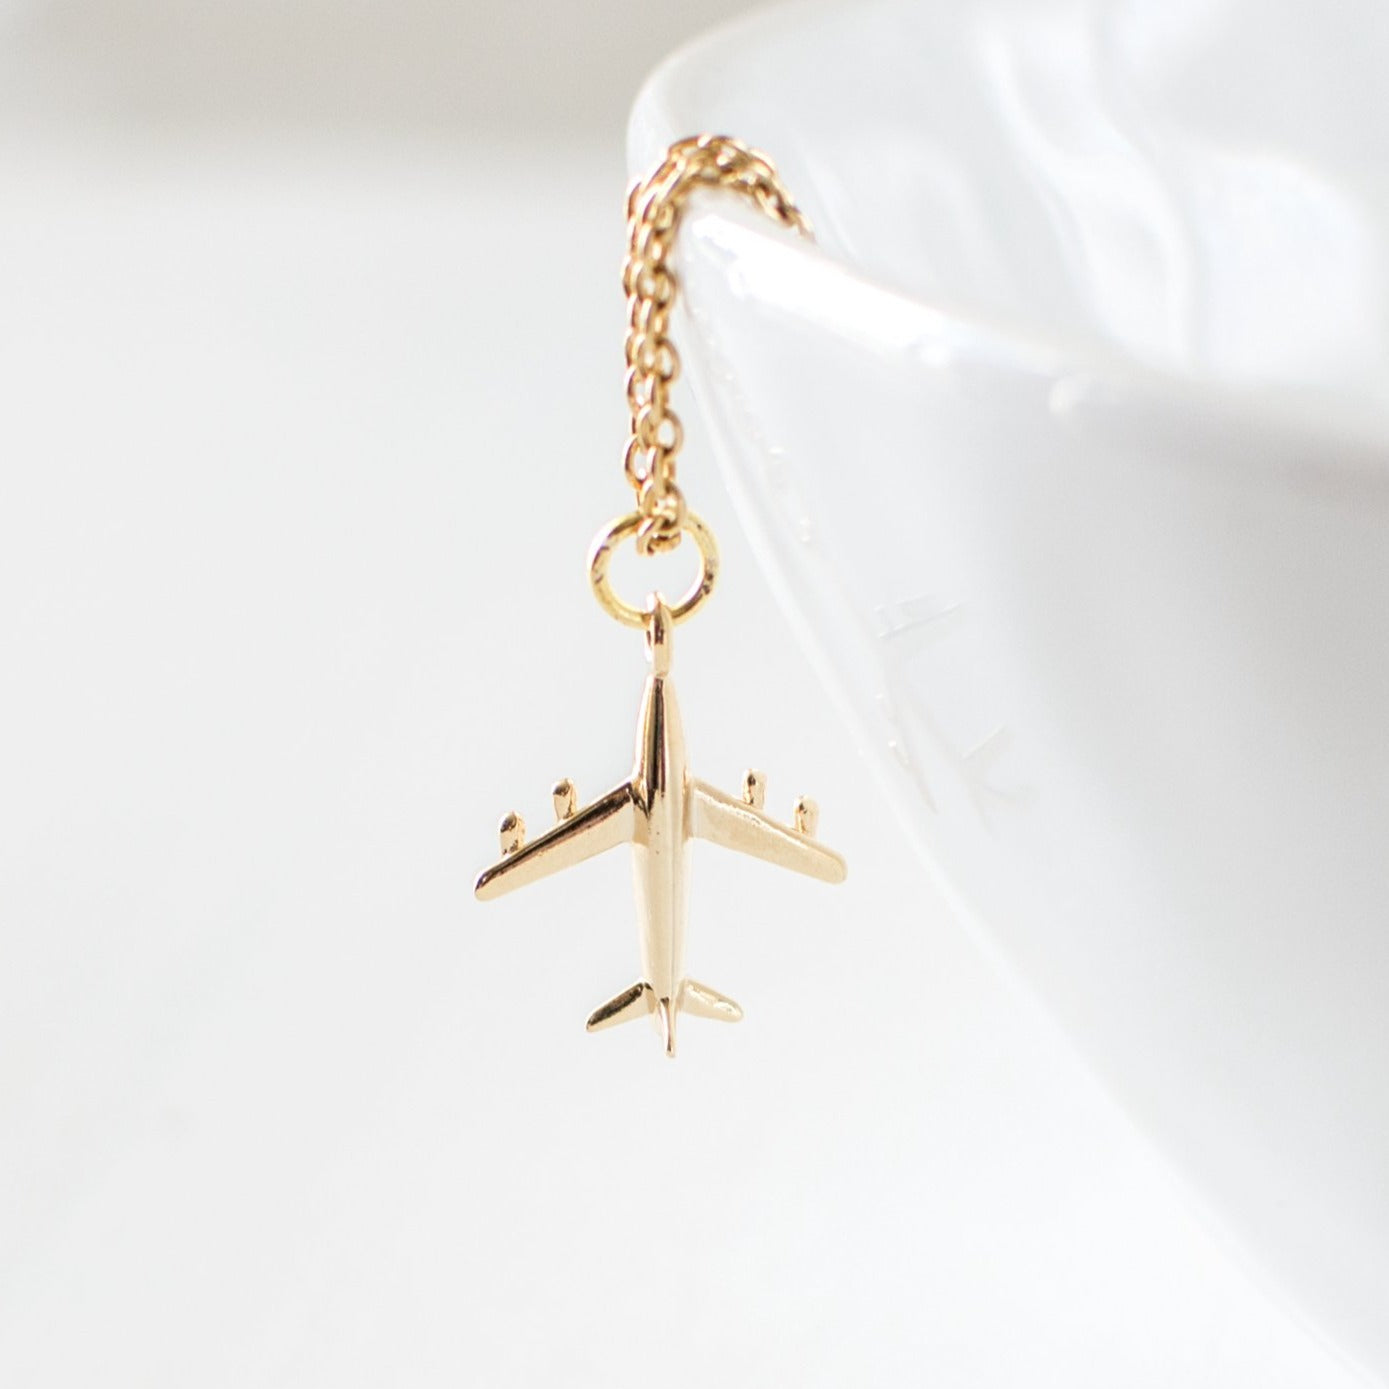 Gold Airplane Necklace – Misoa Jewelry